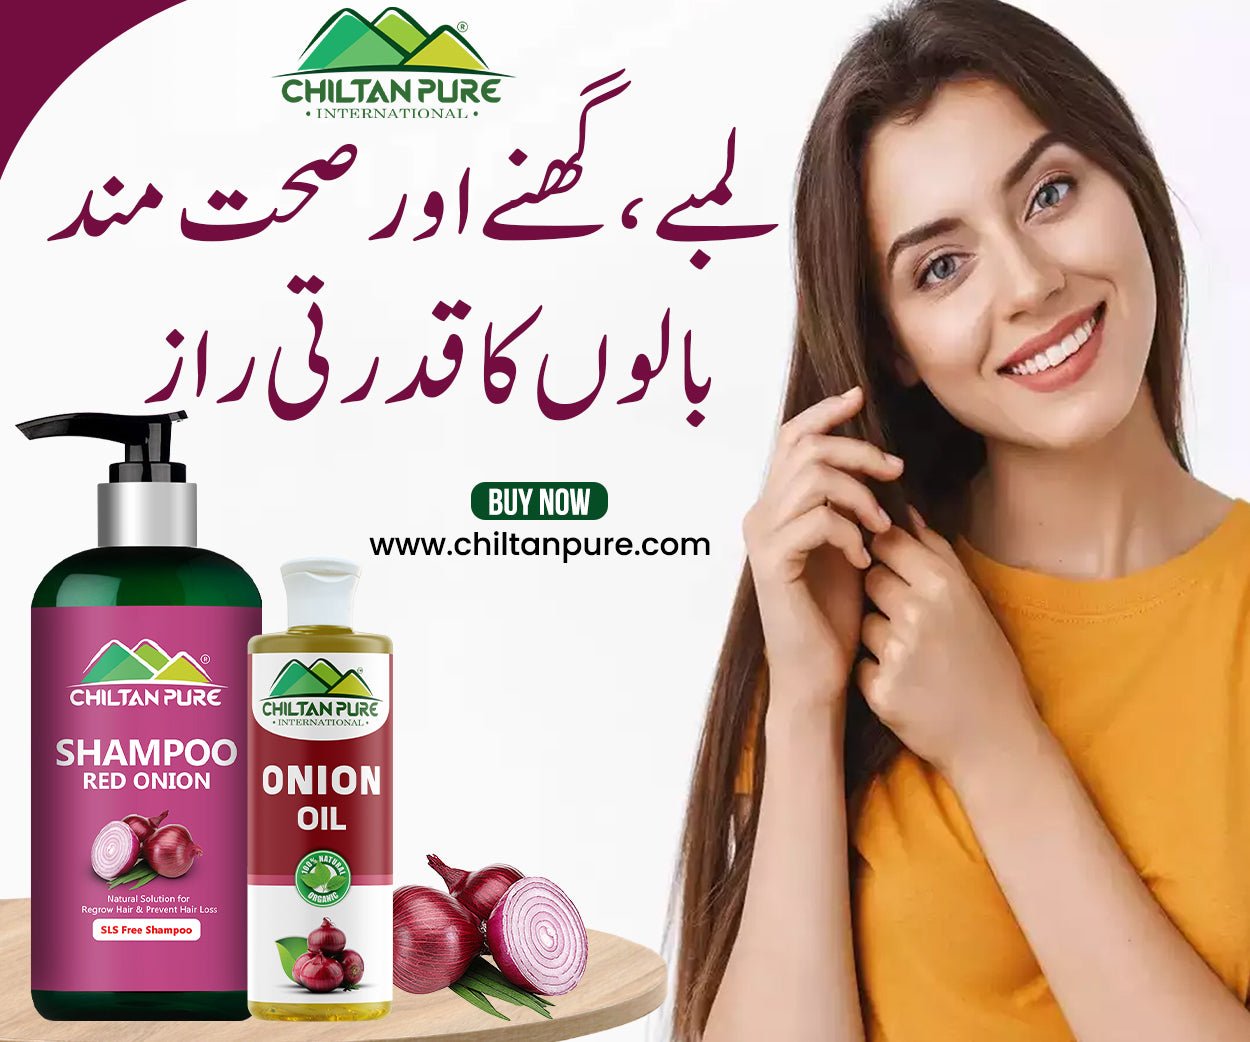 Onion Pack-Boosts Hair Growth, Nourishes Scalp, Lessen Hair Fall - ChiltanPure